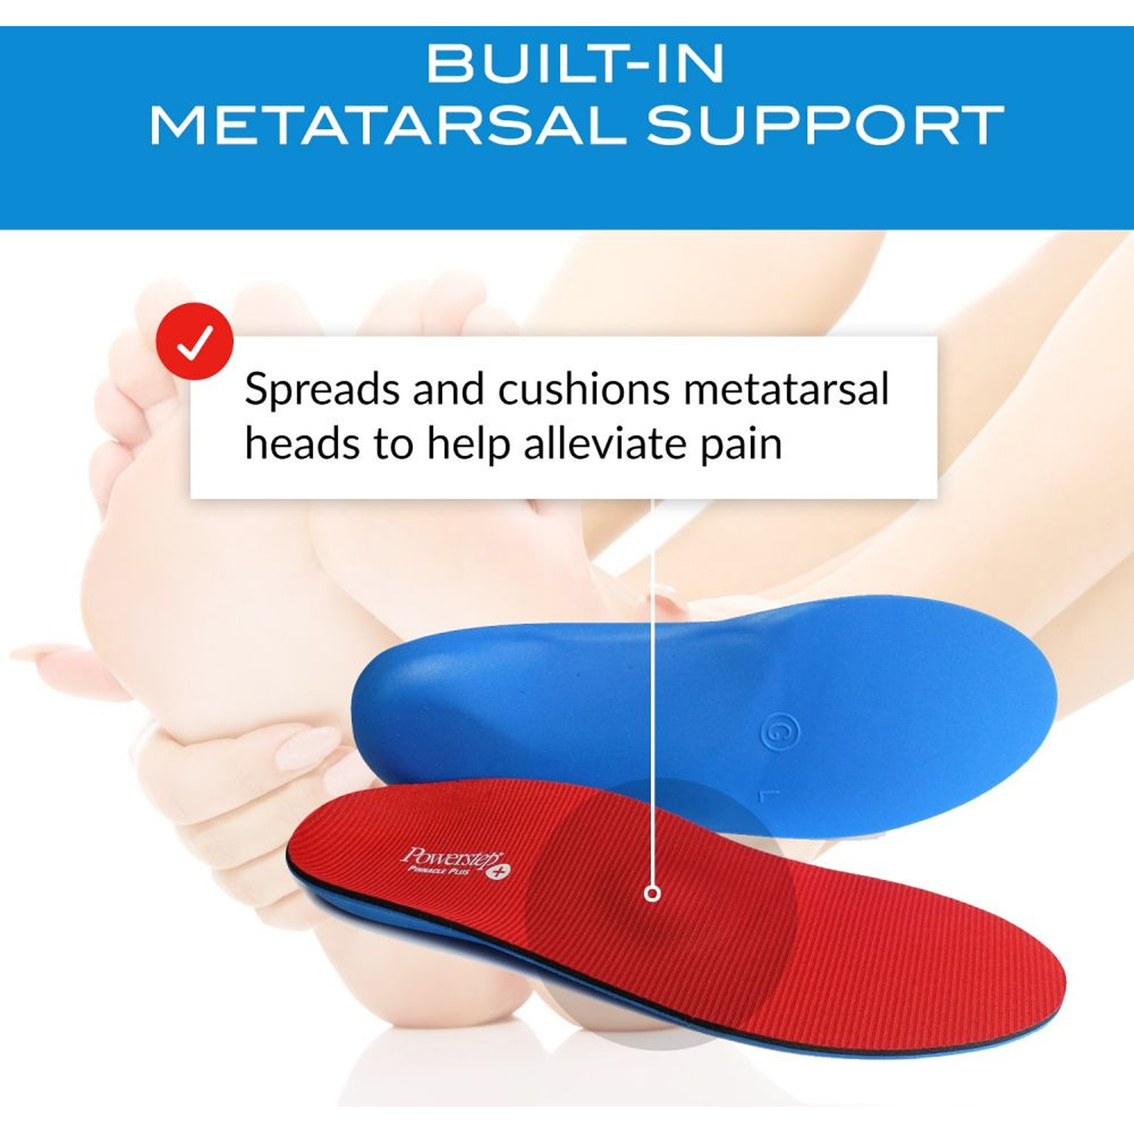 Powerstep Pinnacle Plus Full Length Orthotic Insoles With Metatarsal